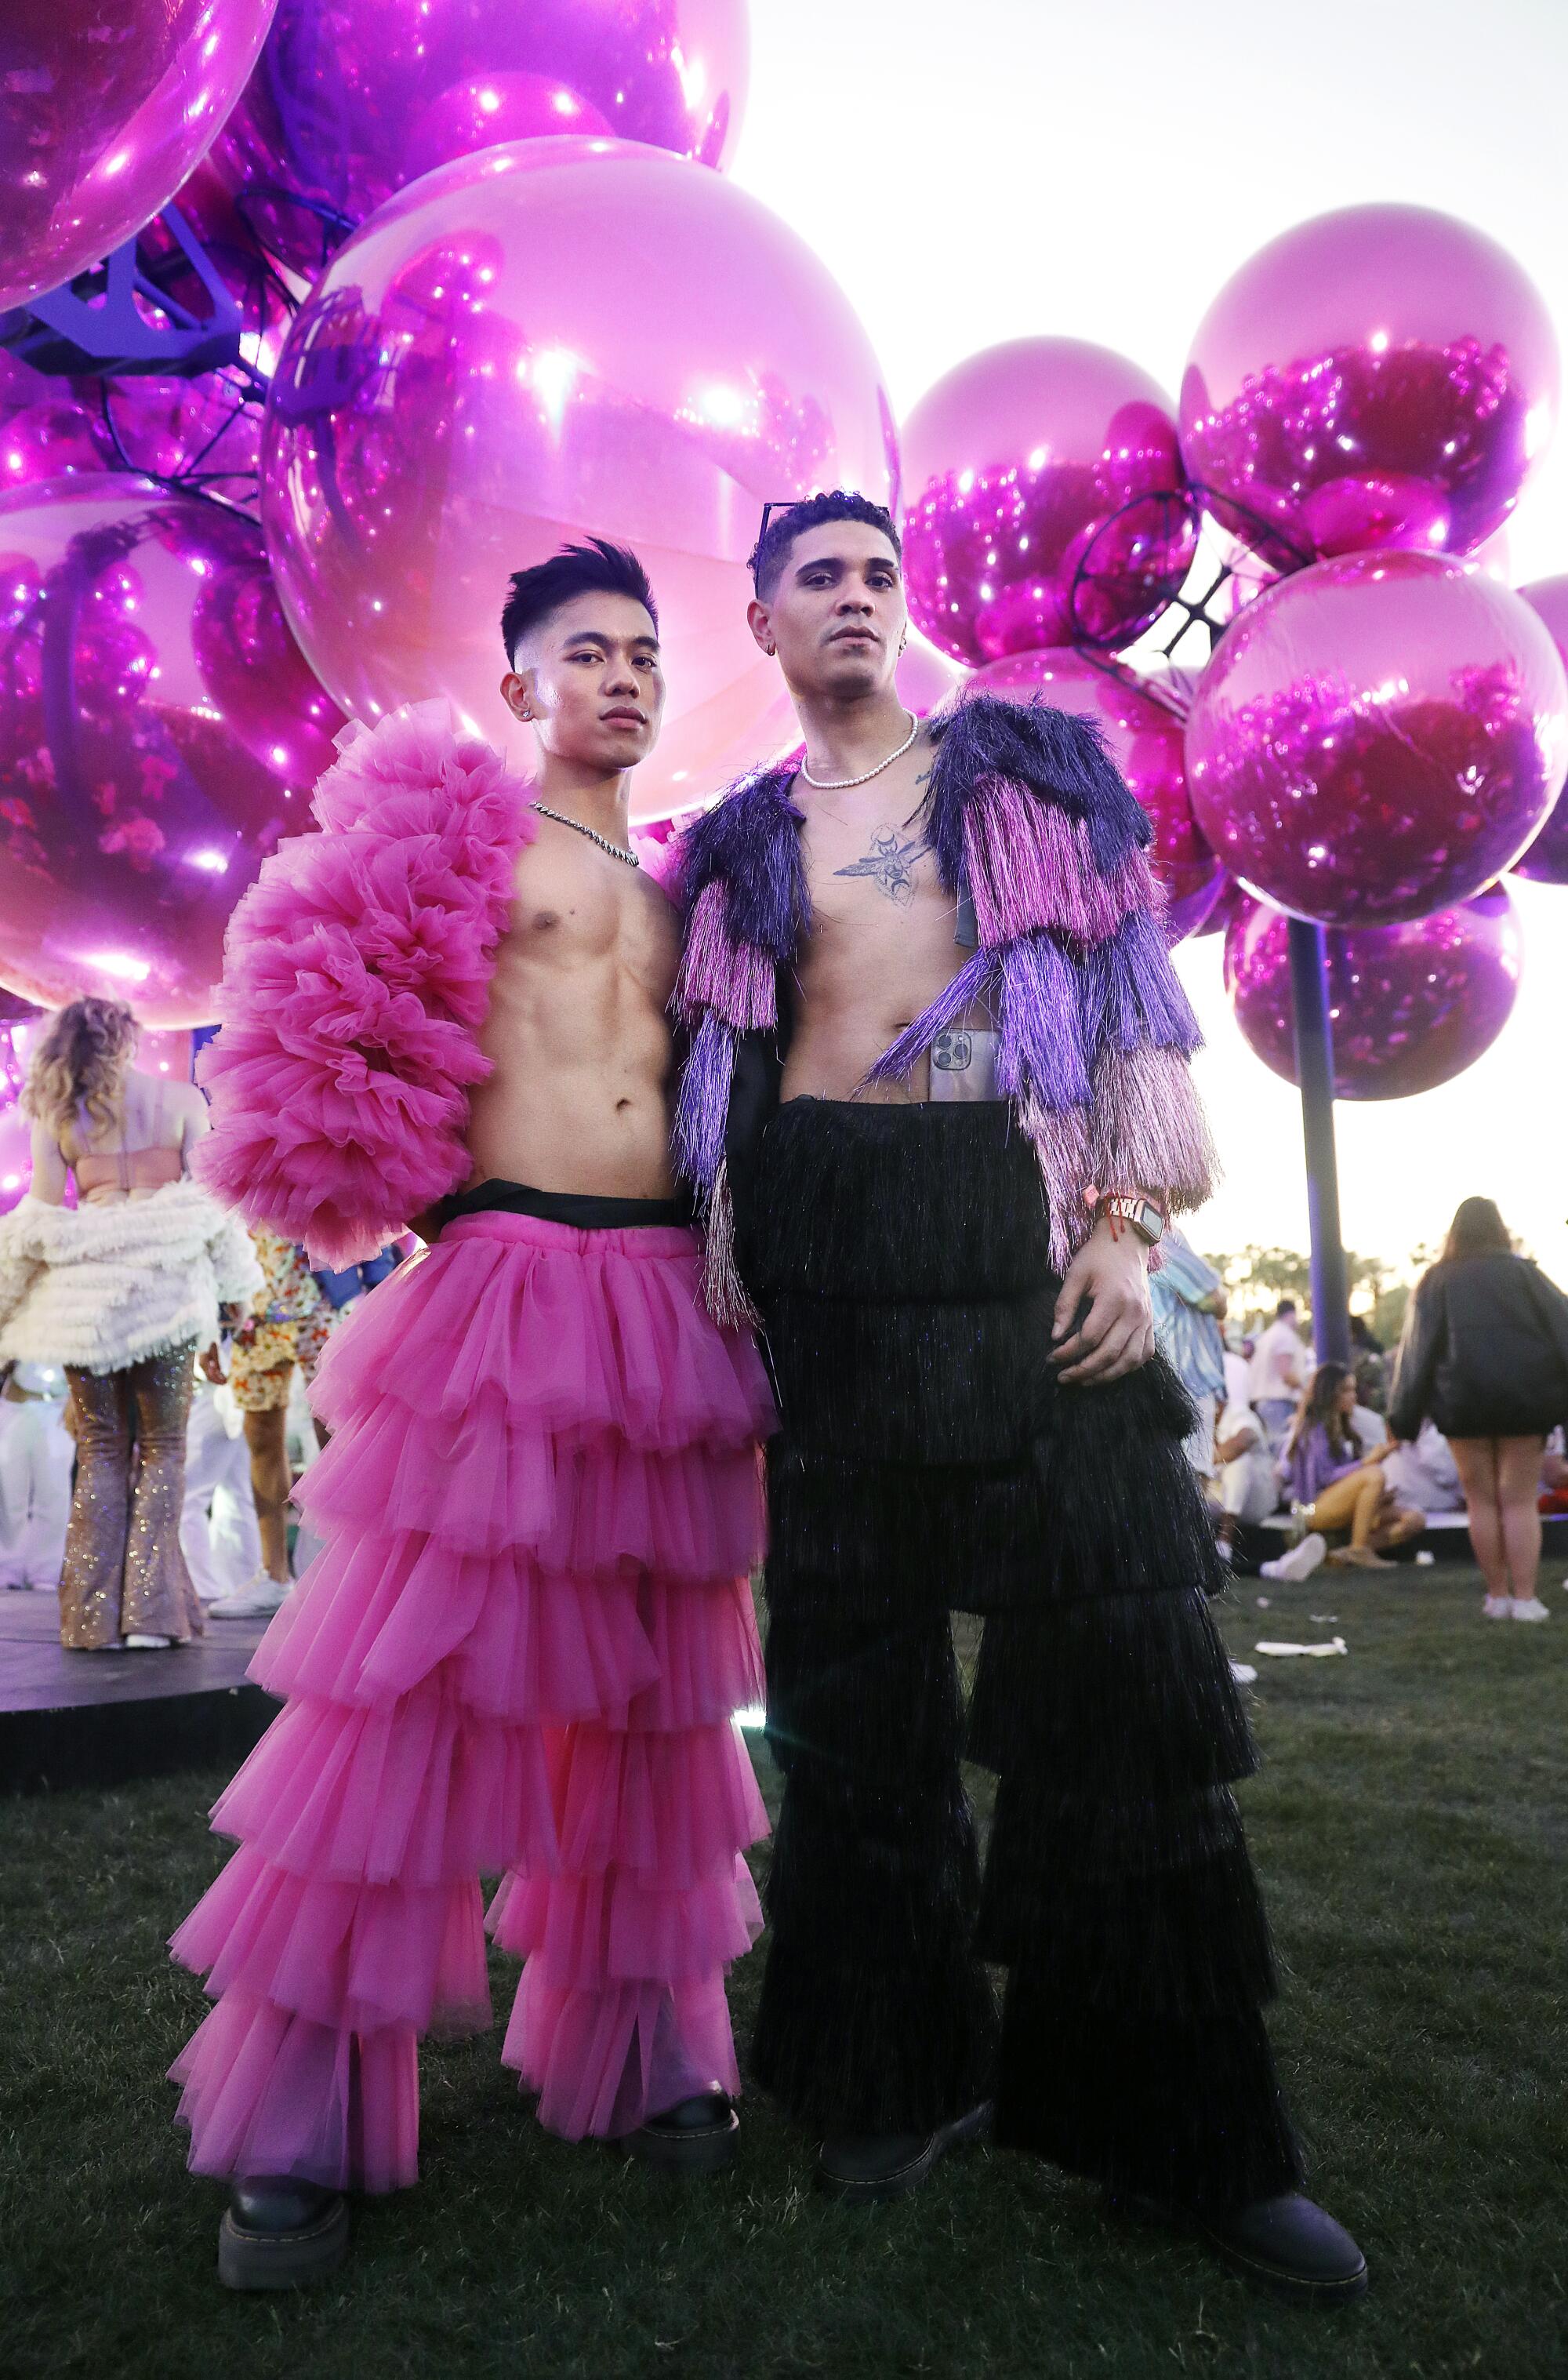 Rave music festival themed party  Rave party outfit, Coachella